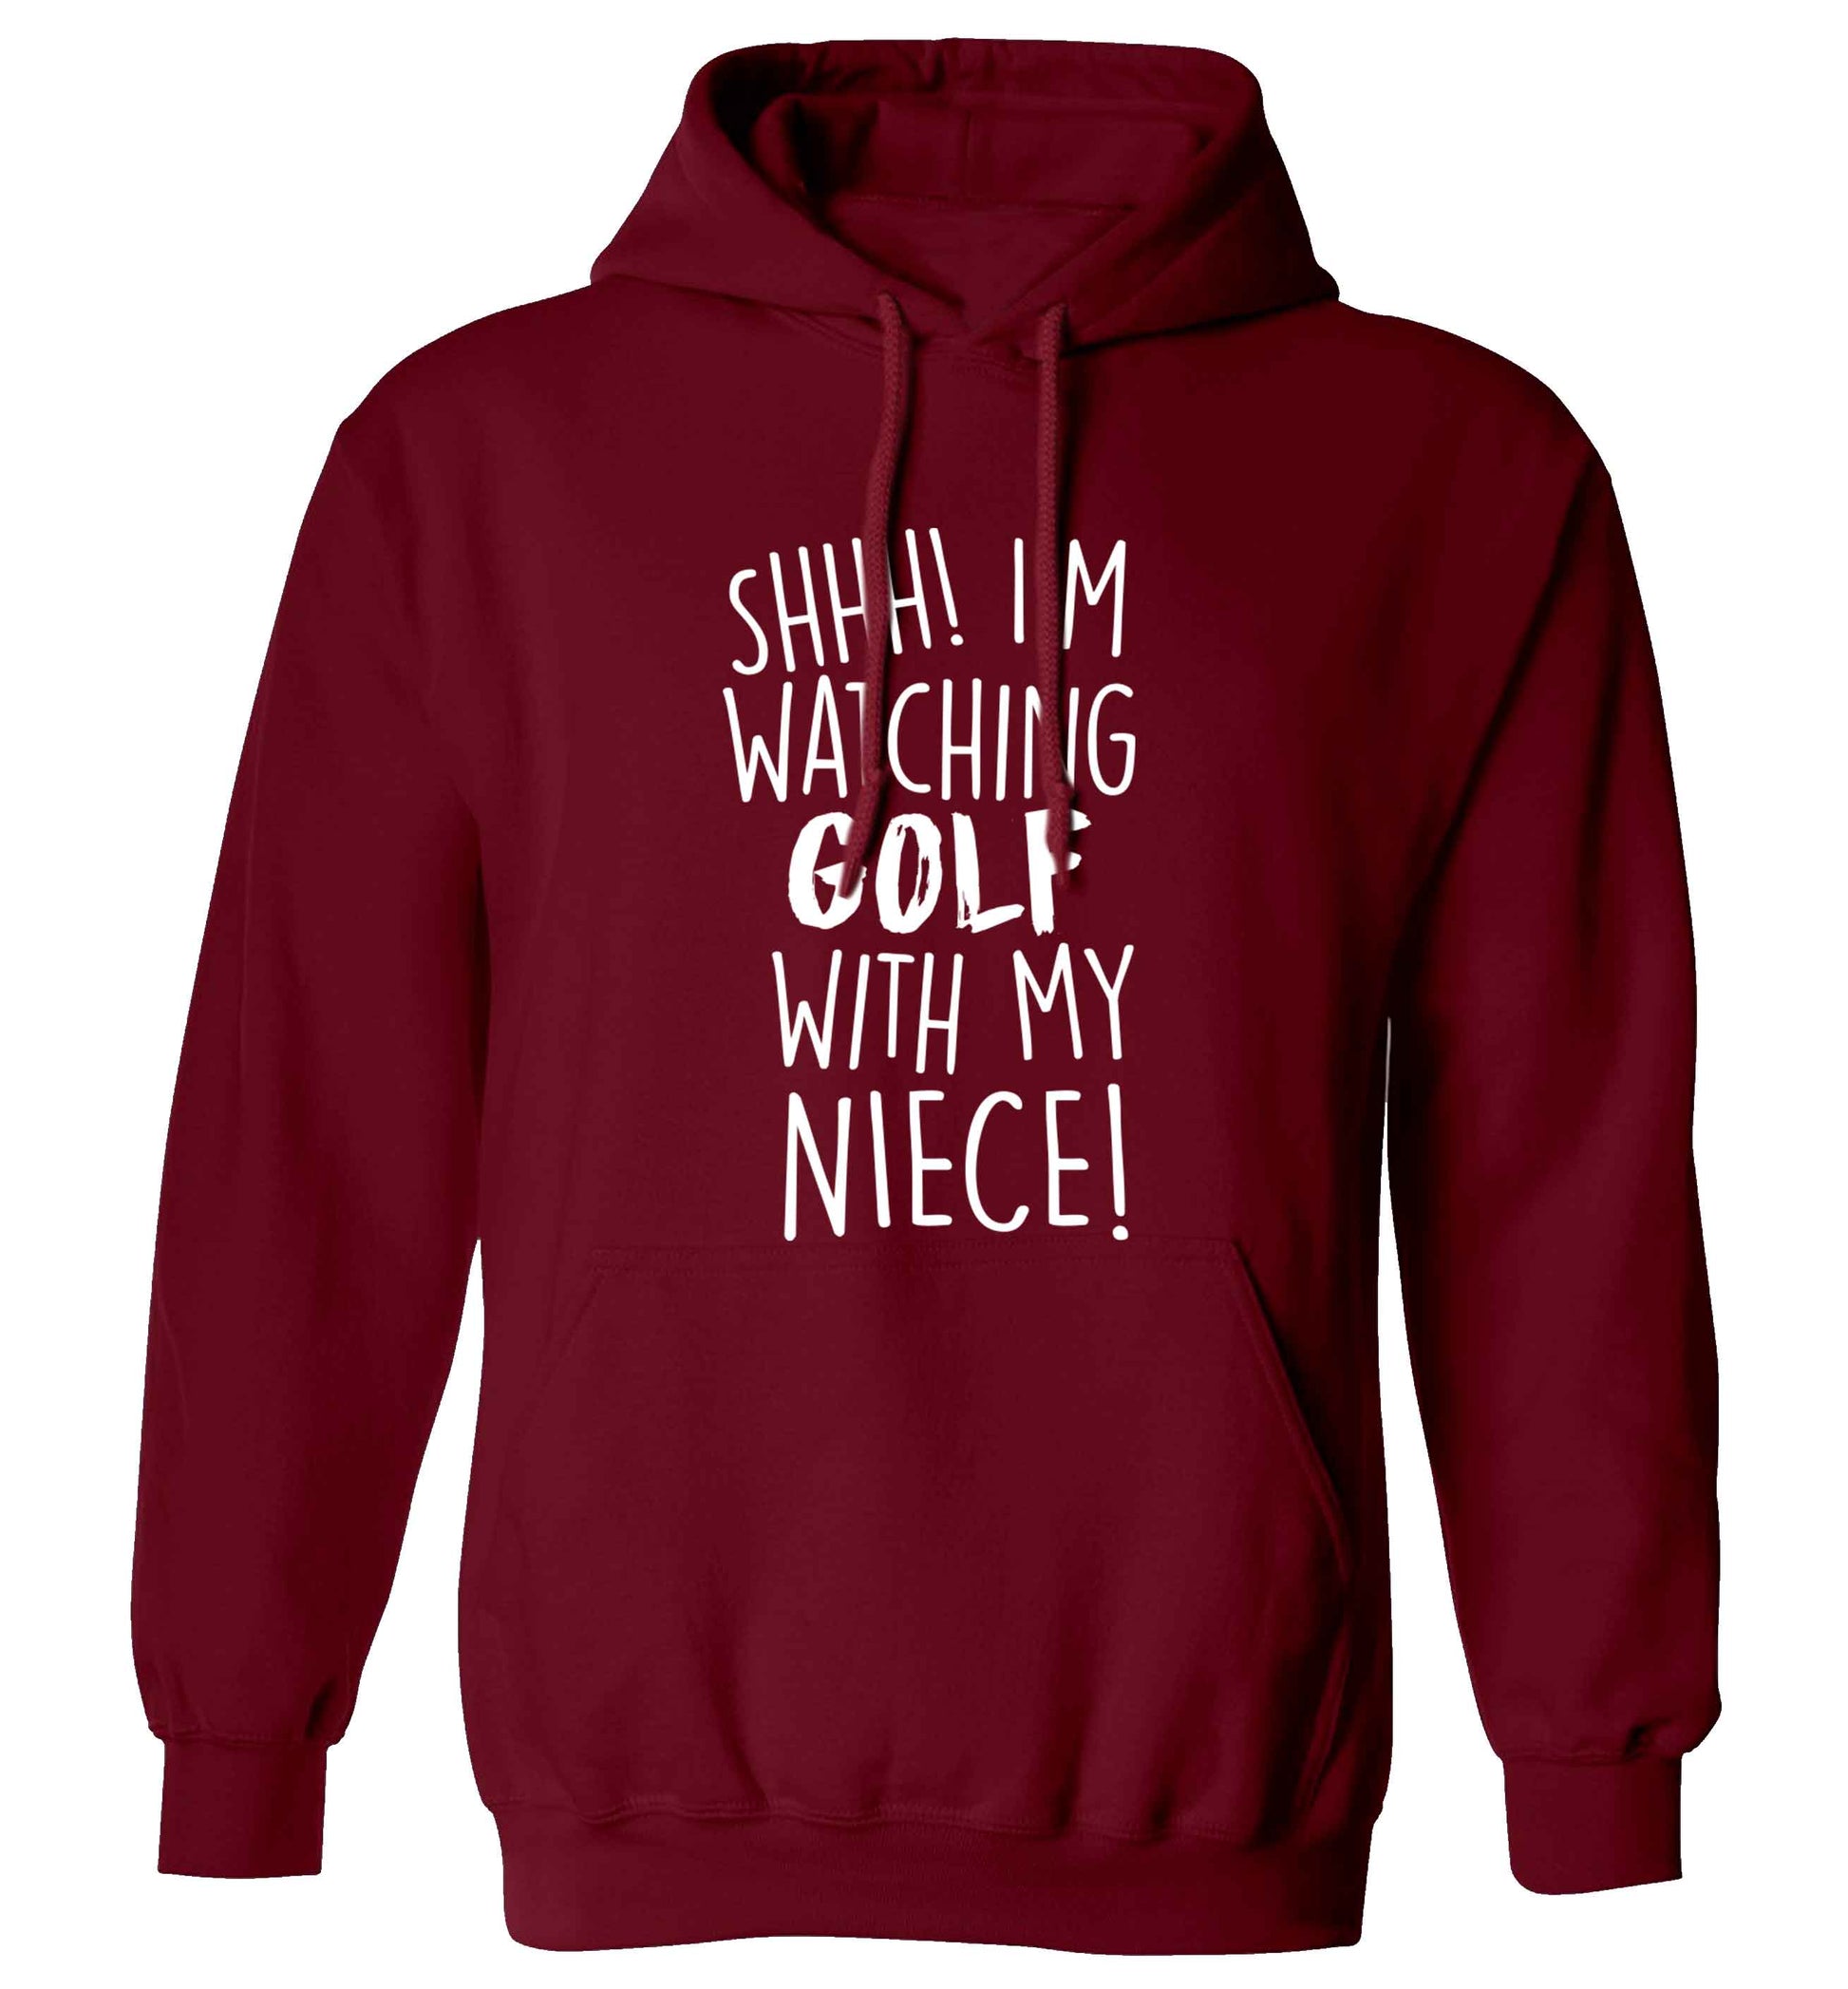 Shh I'm watching golf with my niece adults unisex maroon hoodie 2XL